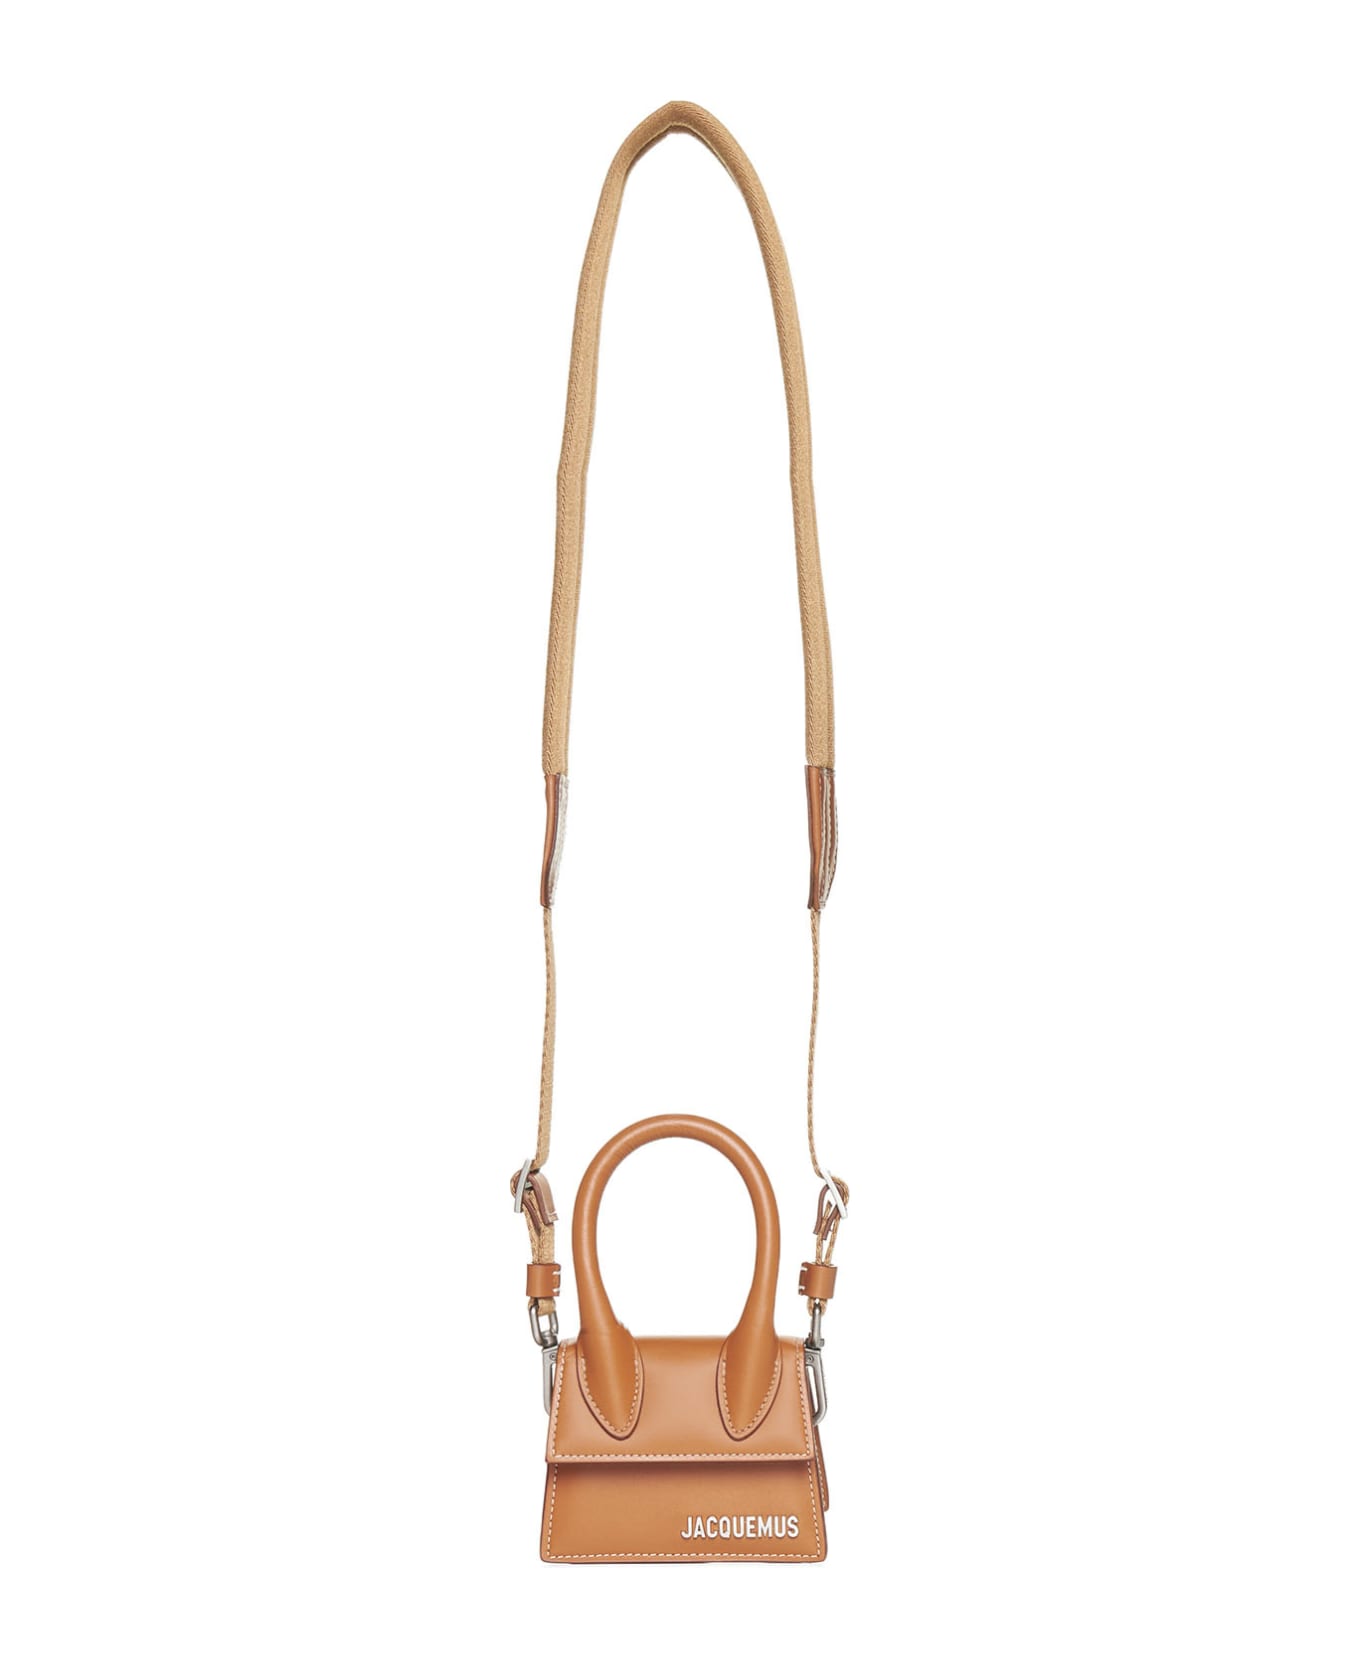 Jacquemus Le Chiquito Homme Bag - Light brown 2 トートバッグ